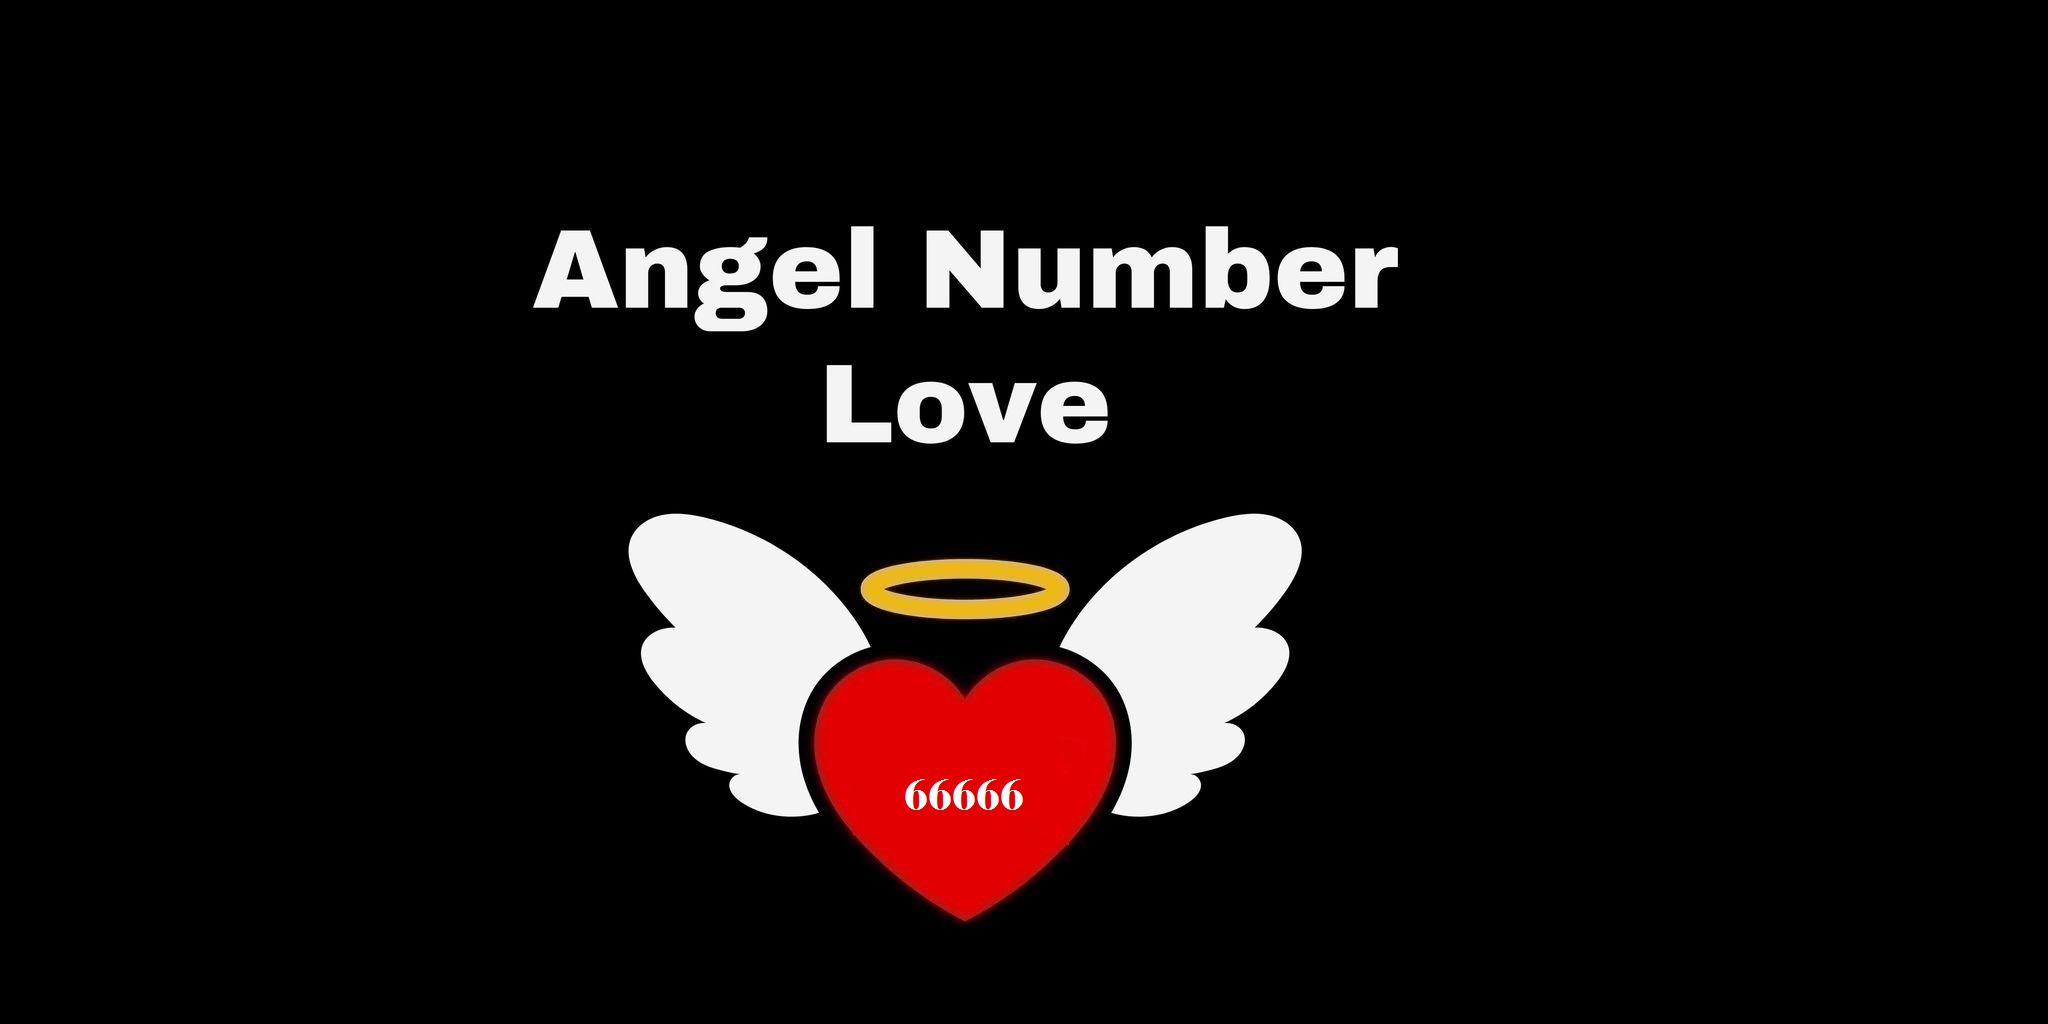 66666 Angel Number Meaning In Love